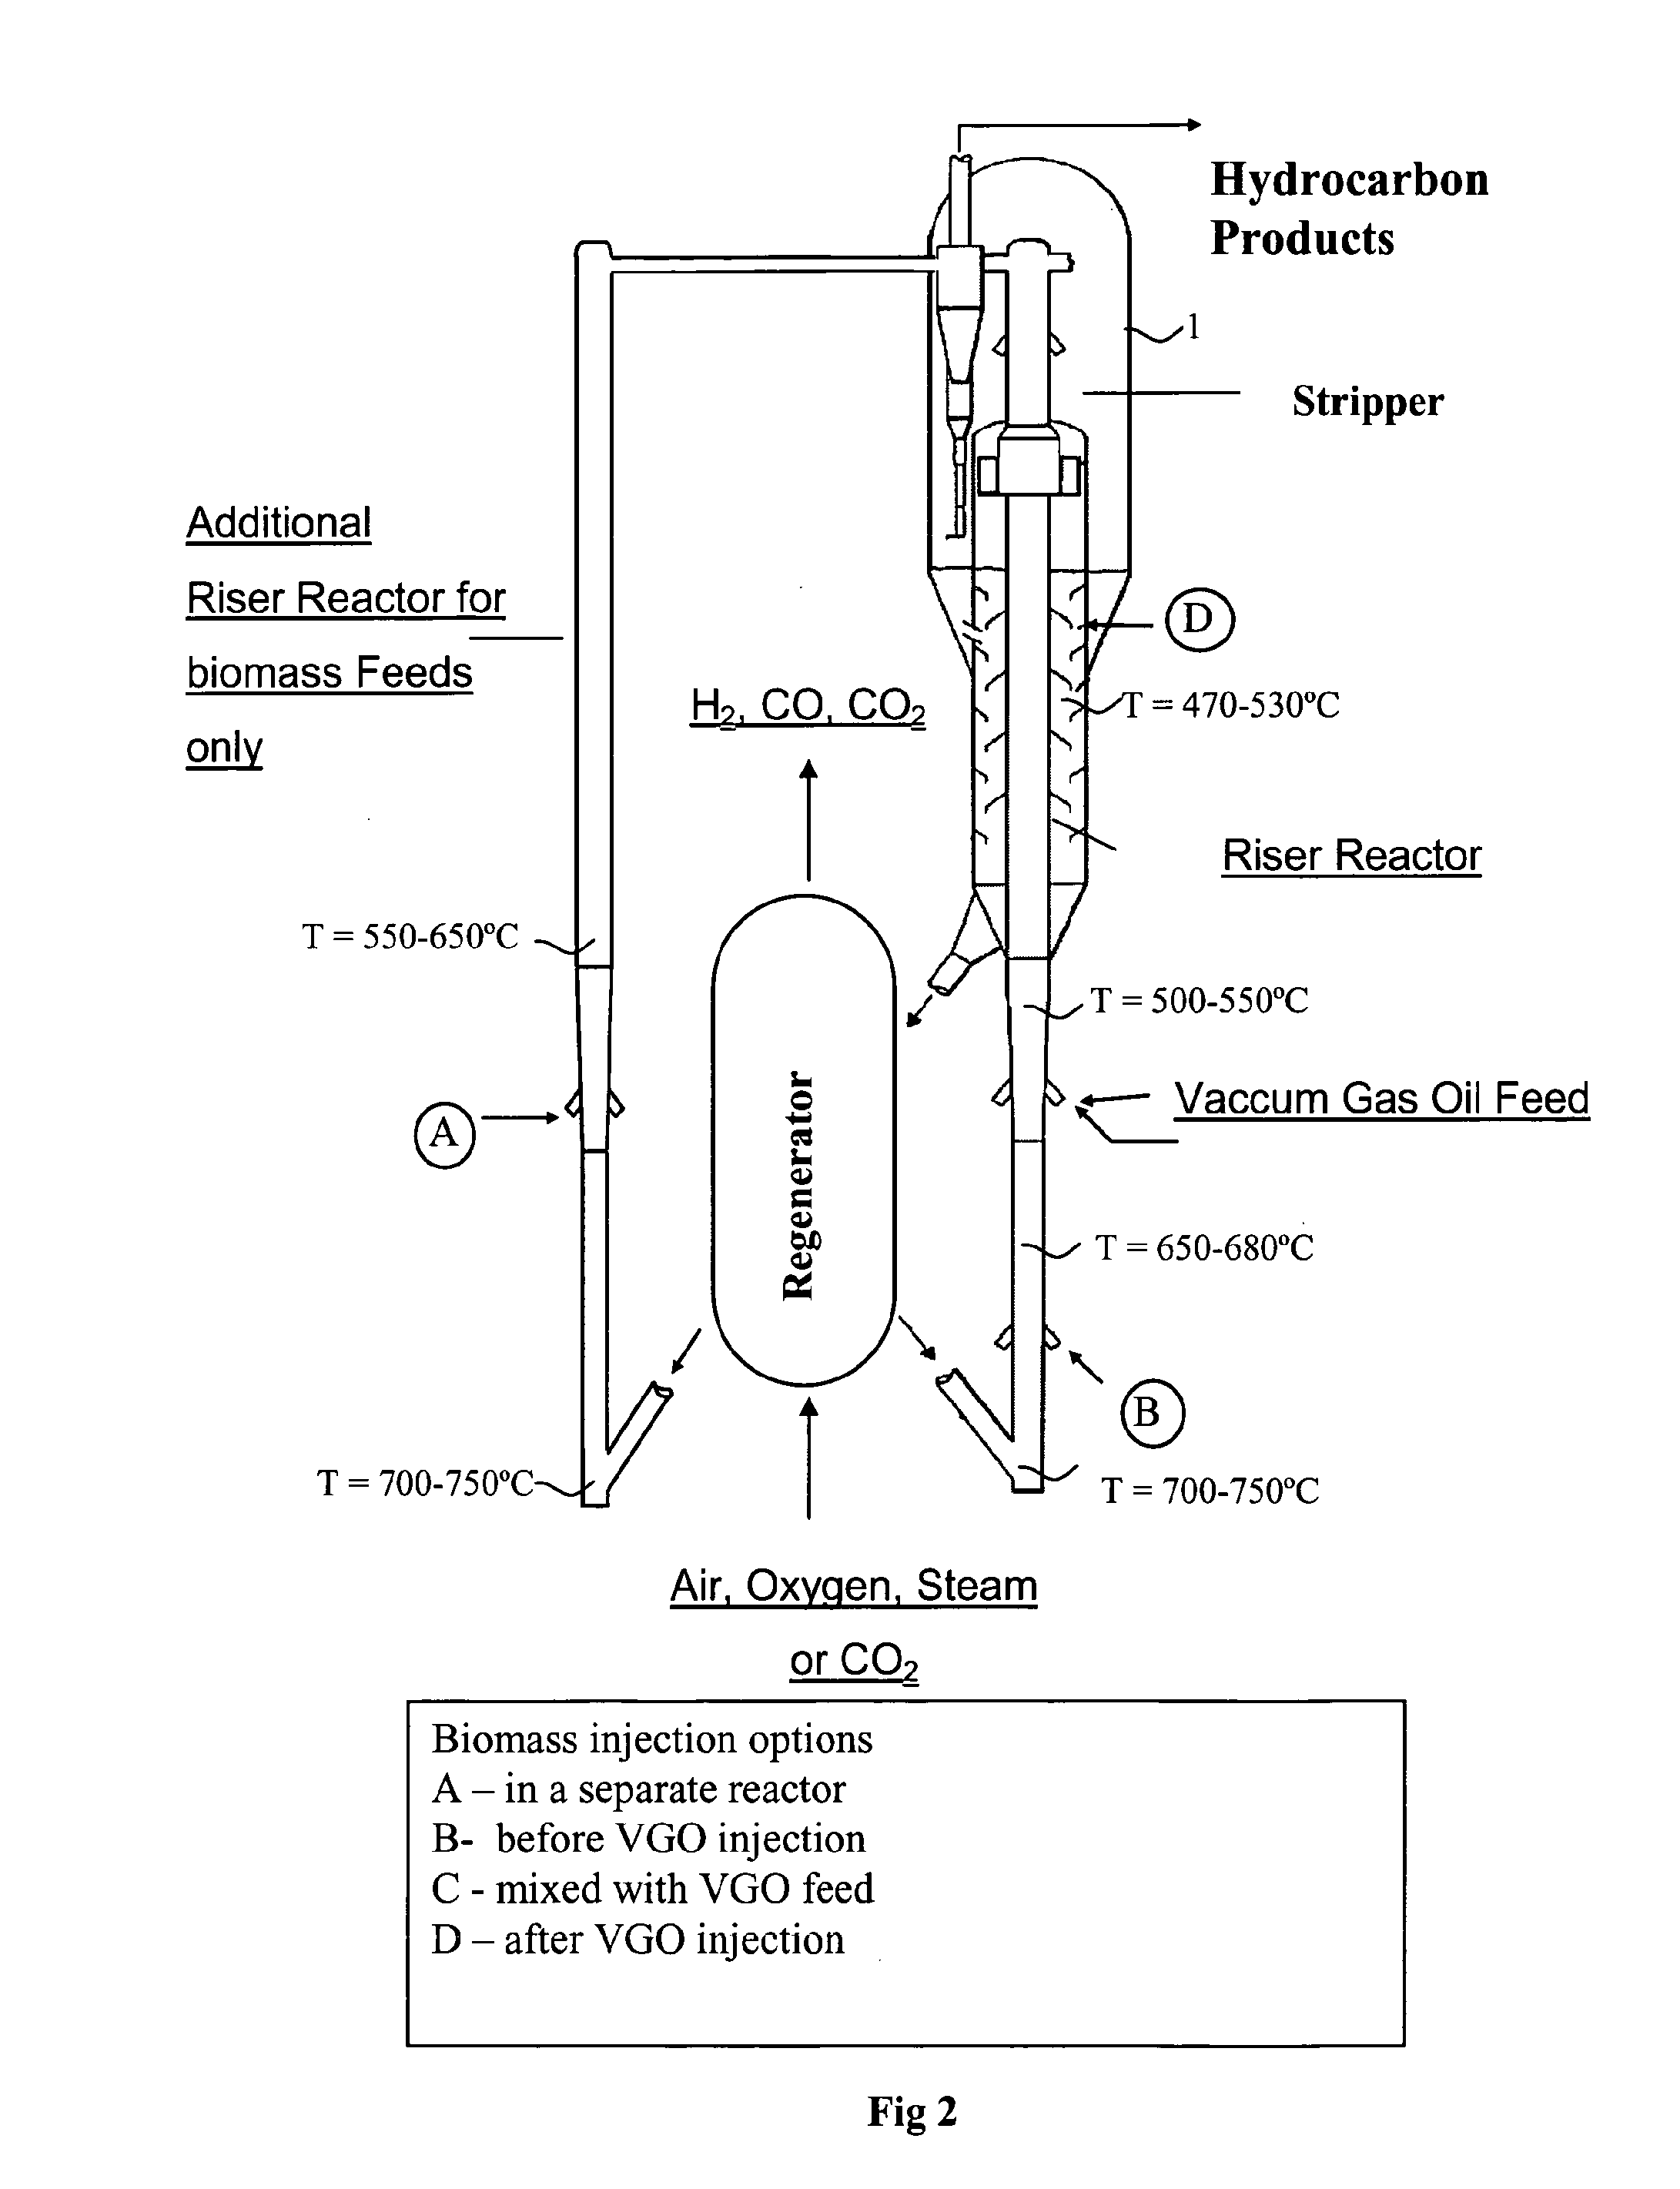 Fluid catalytic cracking of oxygenated compounds